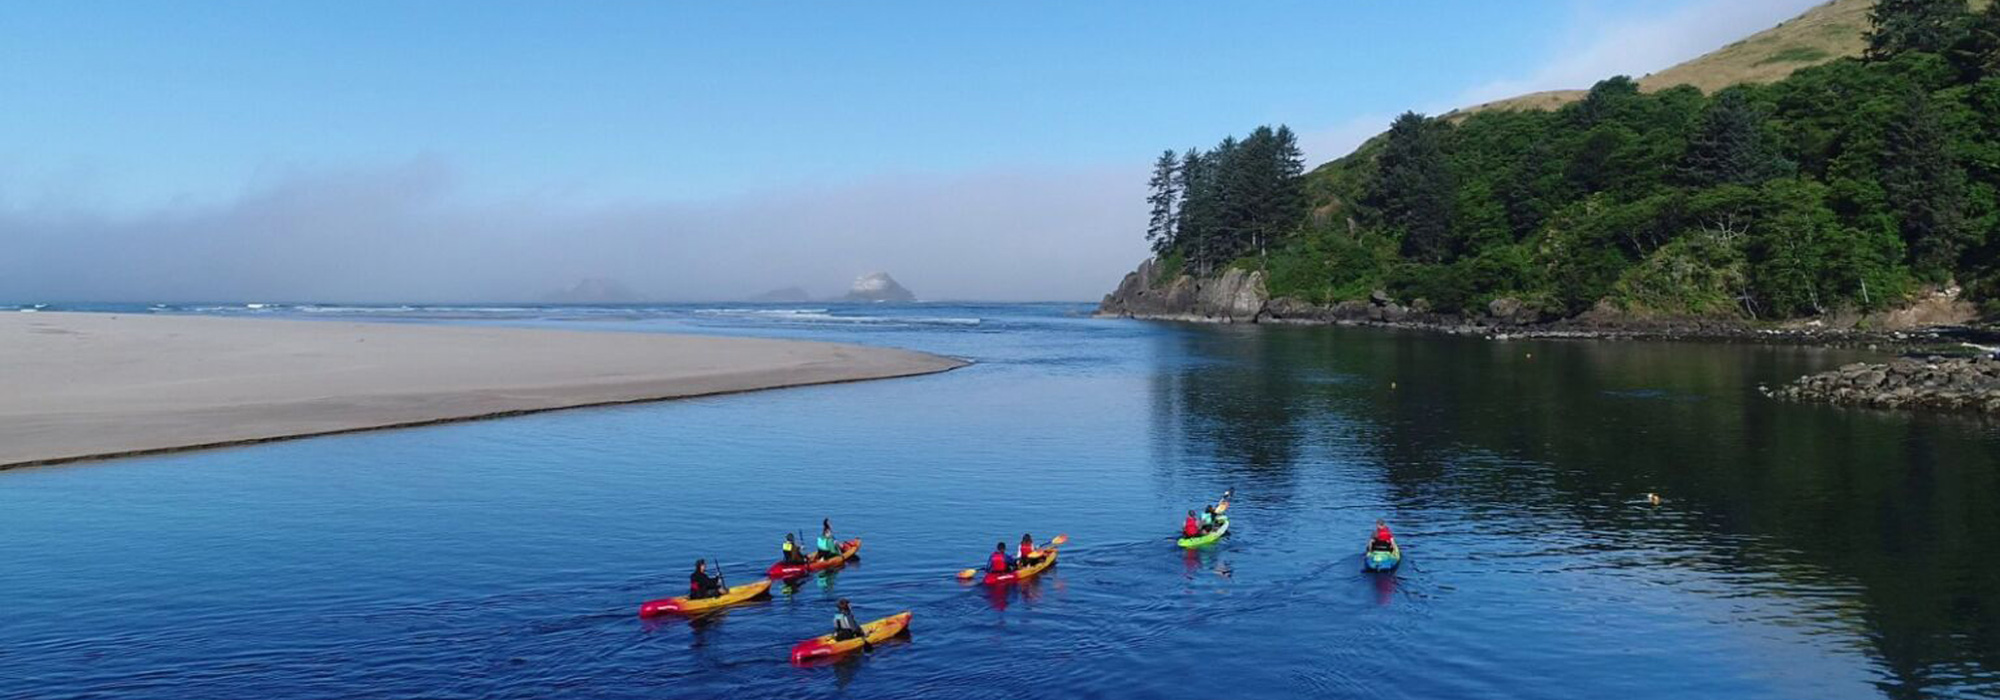 group of kayakers paddle on calm water